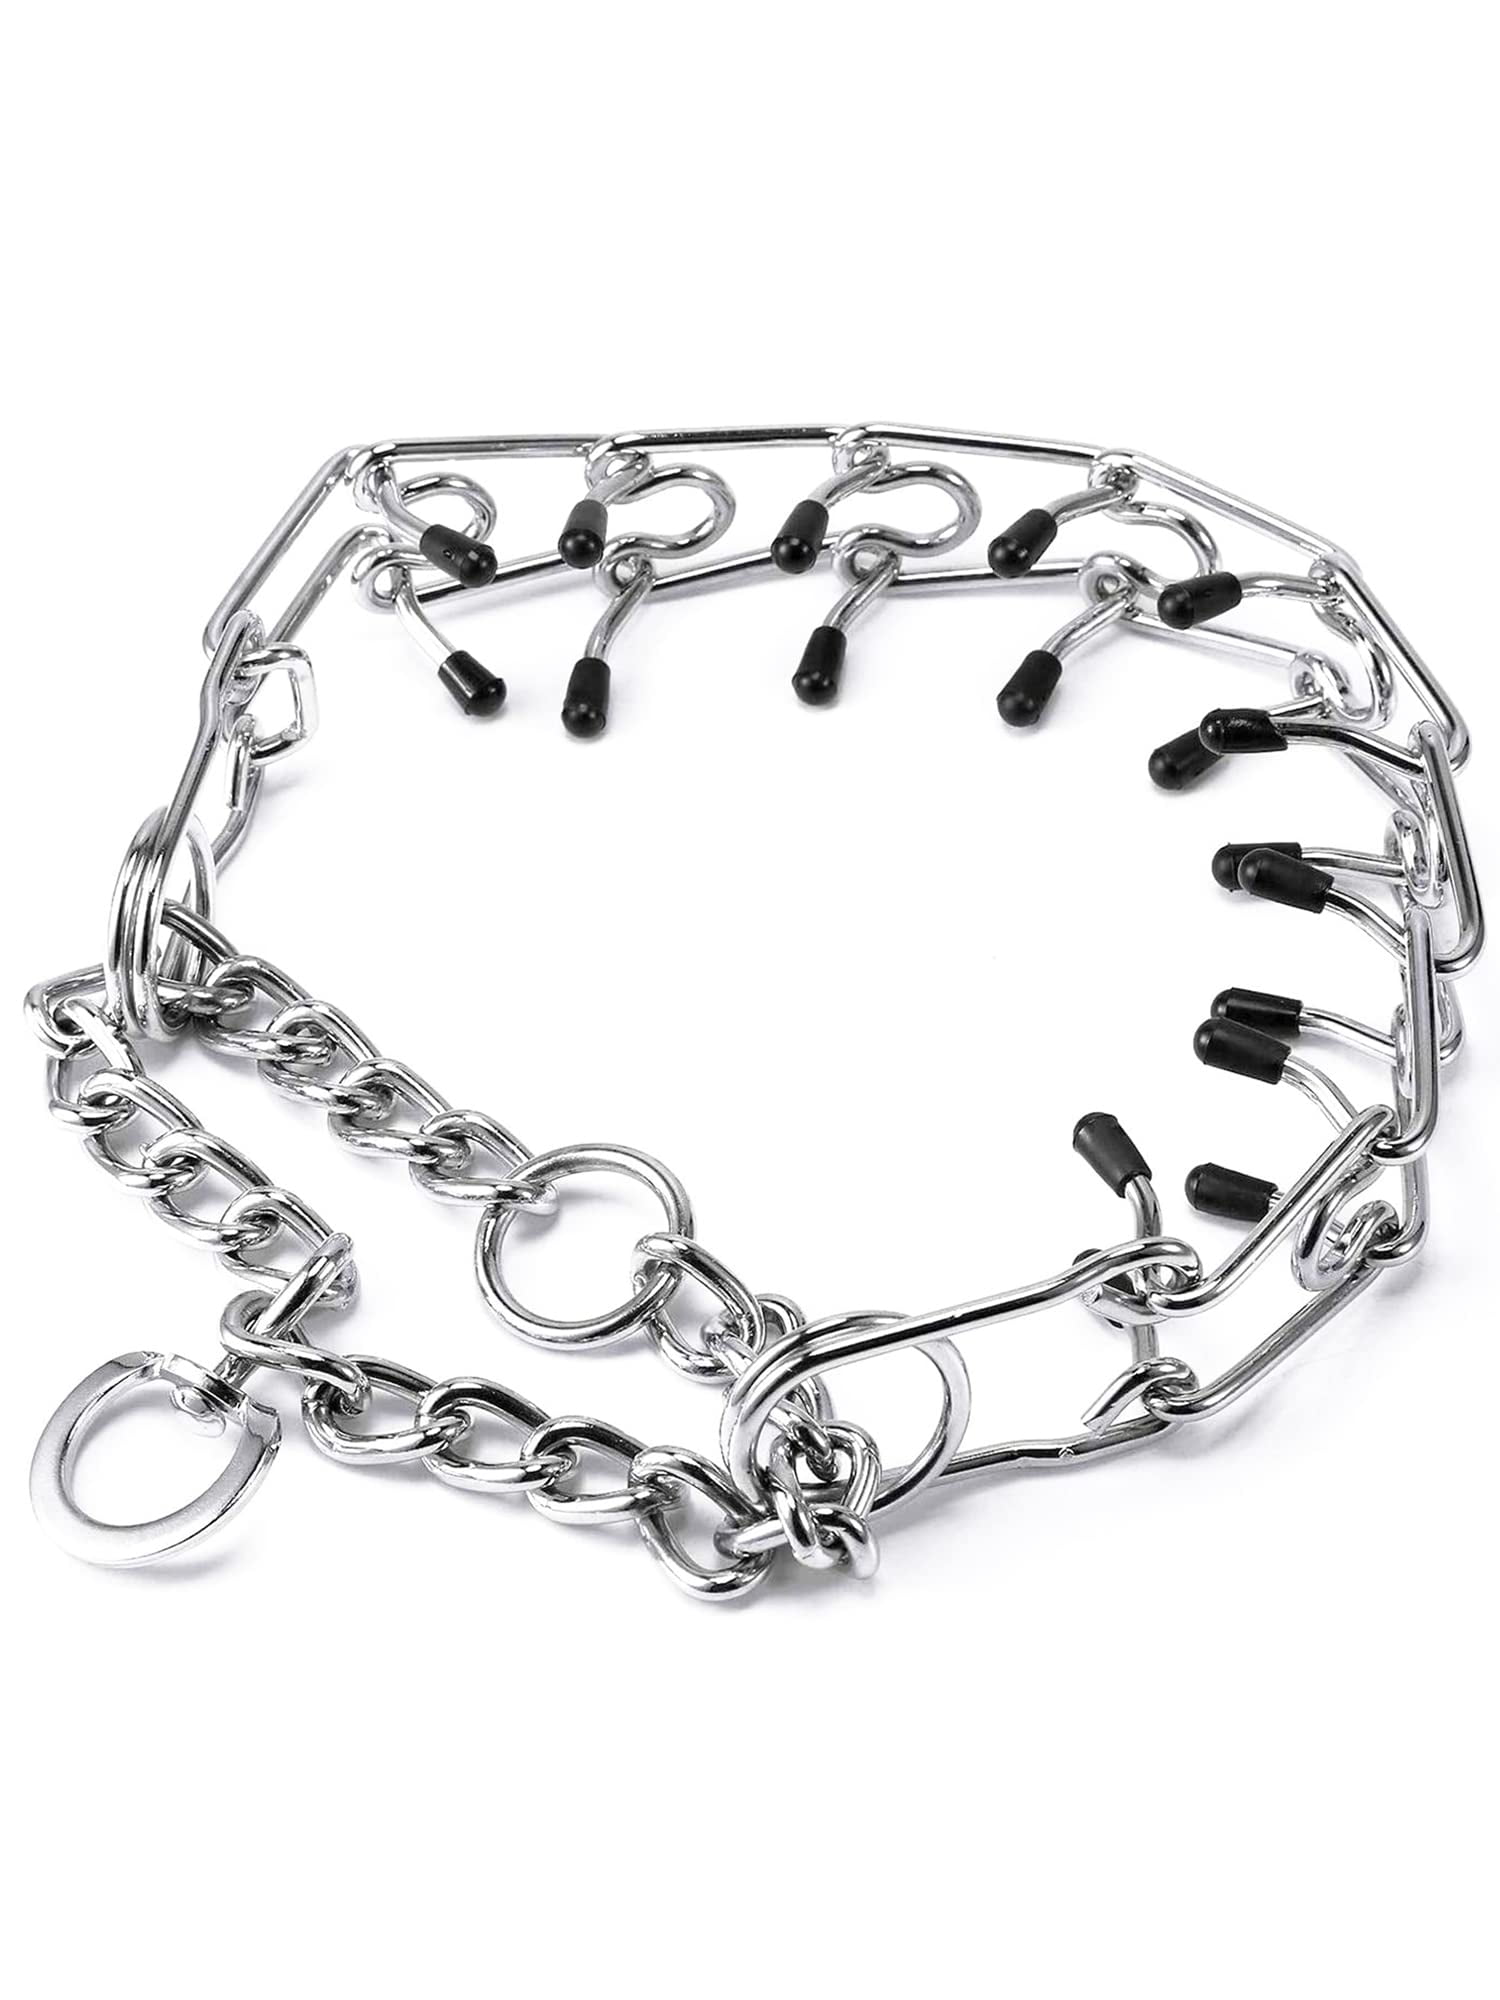 Tarmfunktion let Forstad Pettom Dog Prong Collar Dog Choker Pinch Collar No Pull with Comfort Rubber  Tips Silver Plating Adjustable Link Chain for Medium Large Dogs Pitbull (L  22 inch) - Walmart.com